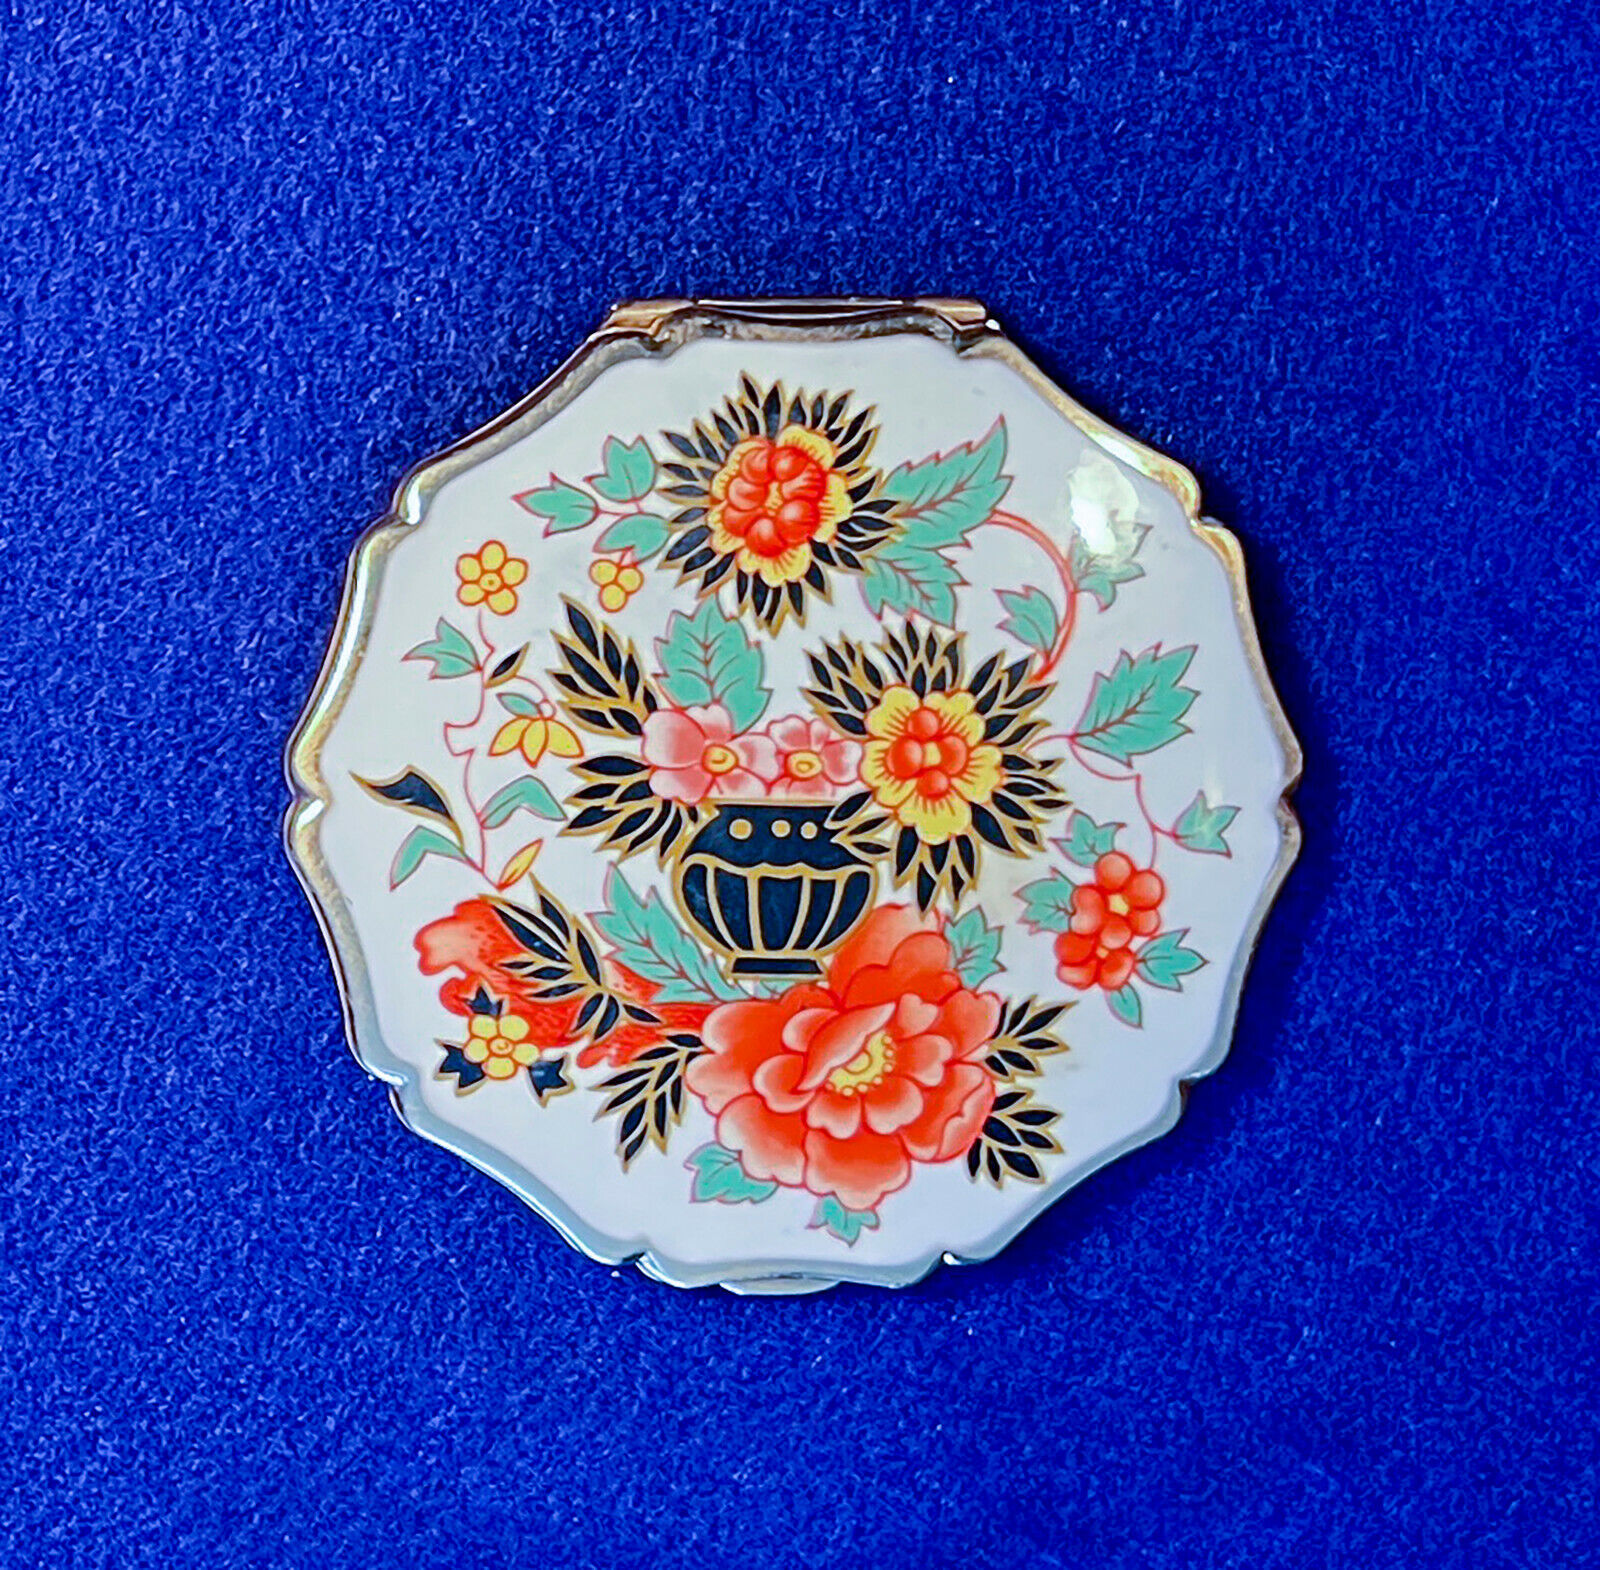 Vintage Stratton Powder Compact - Beautiful Floral Design Made in England